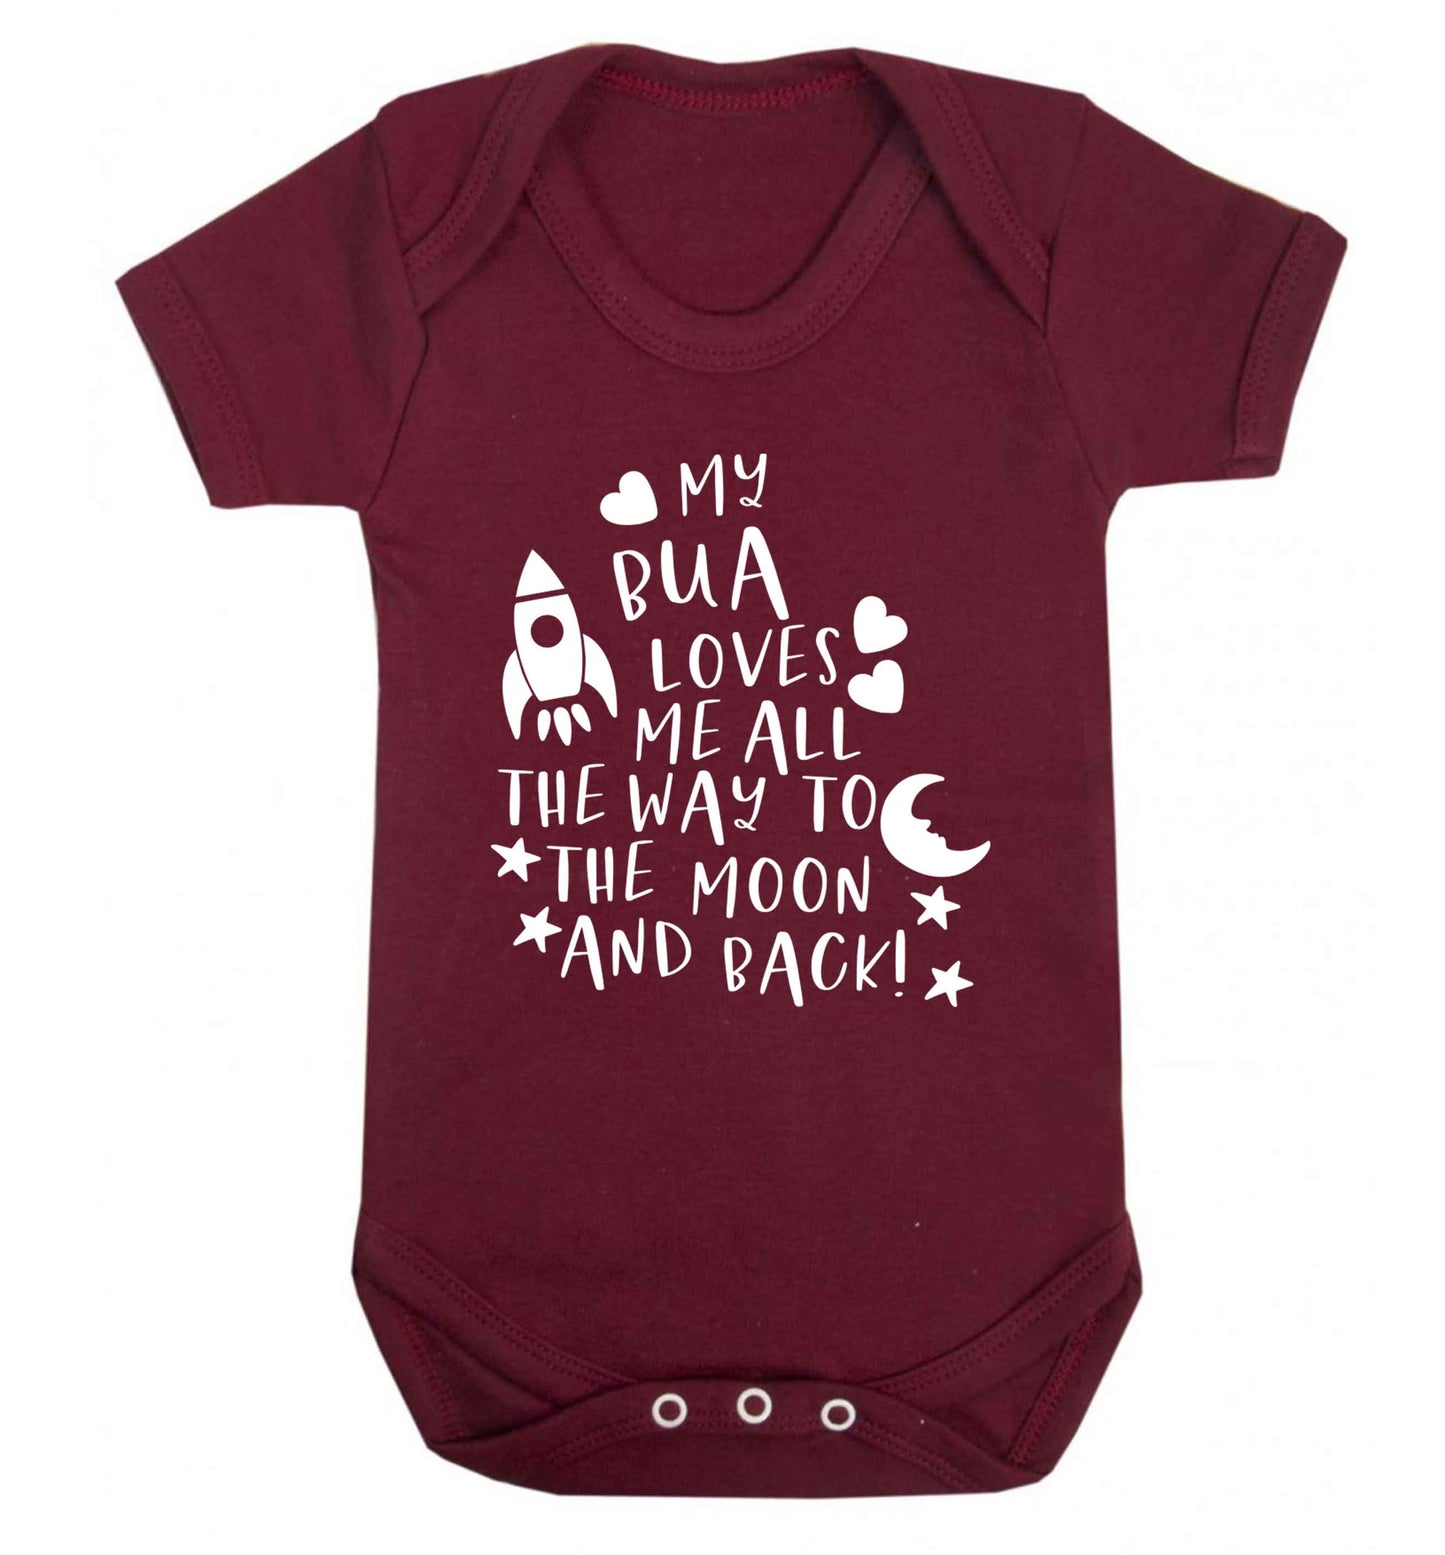 My bua loves me all they way to the moon and back Baby Vest maroon 18-24 months